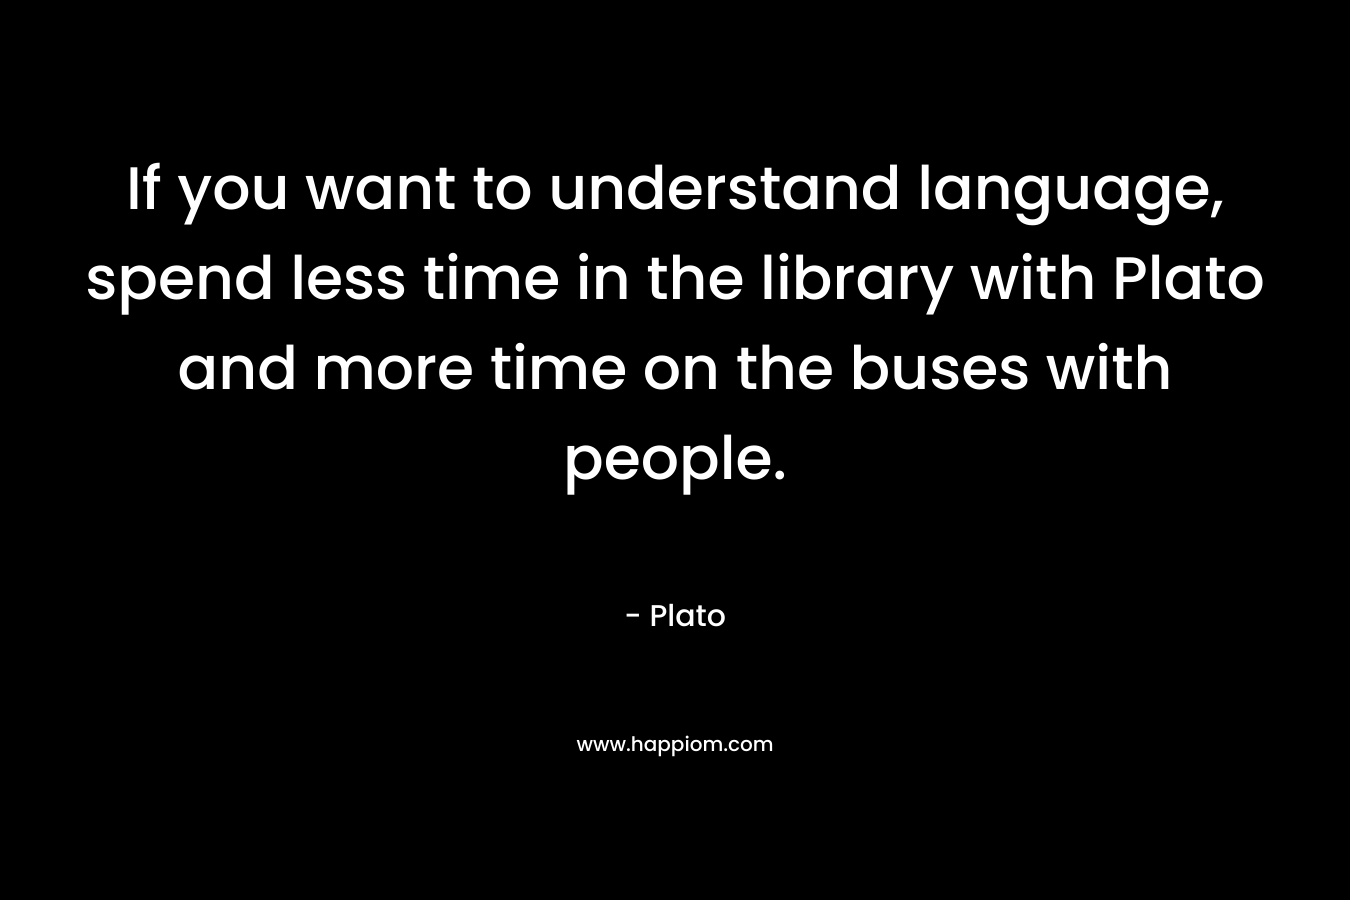 If you want to understand language, spend less time in the library with Plato and more time on the buses with people. – Plato